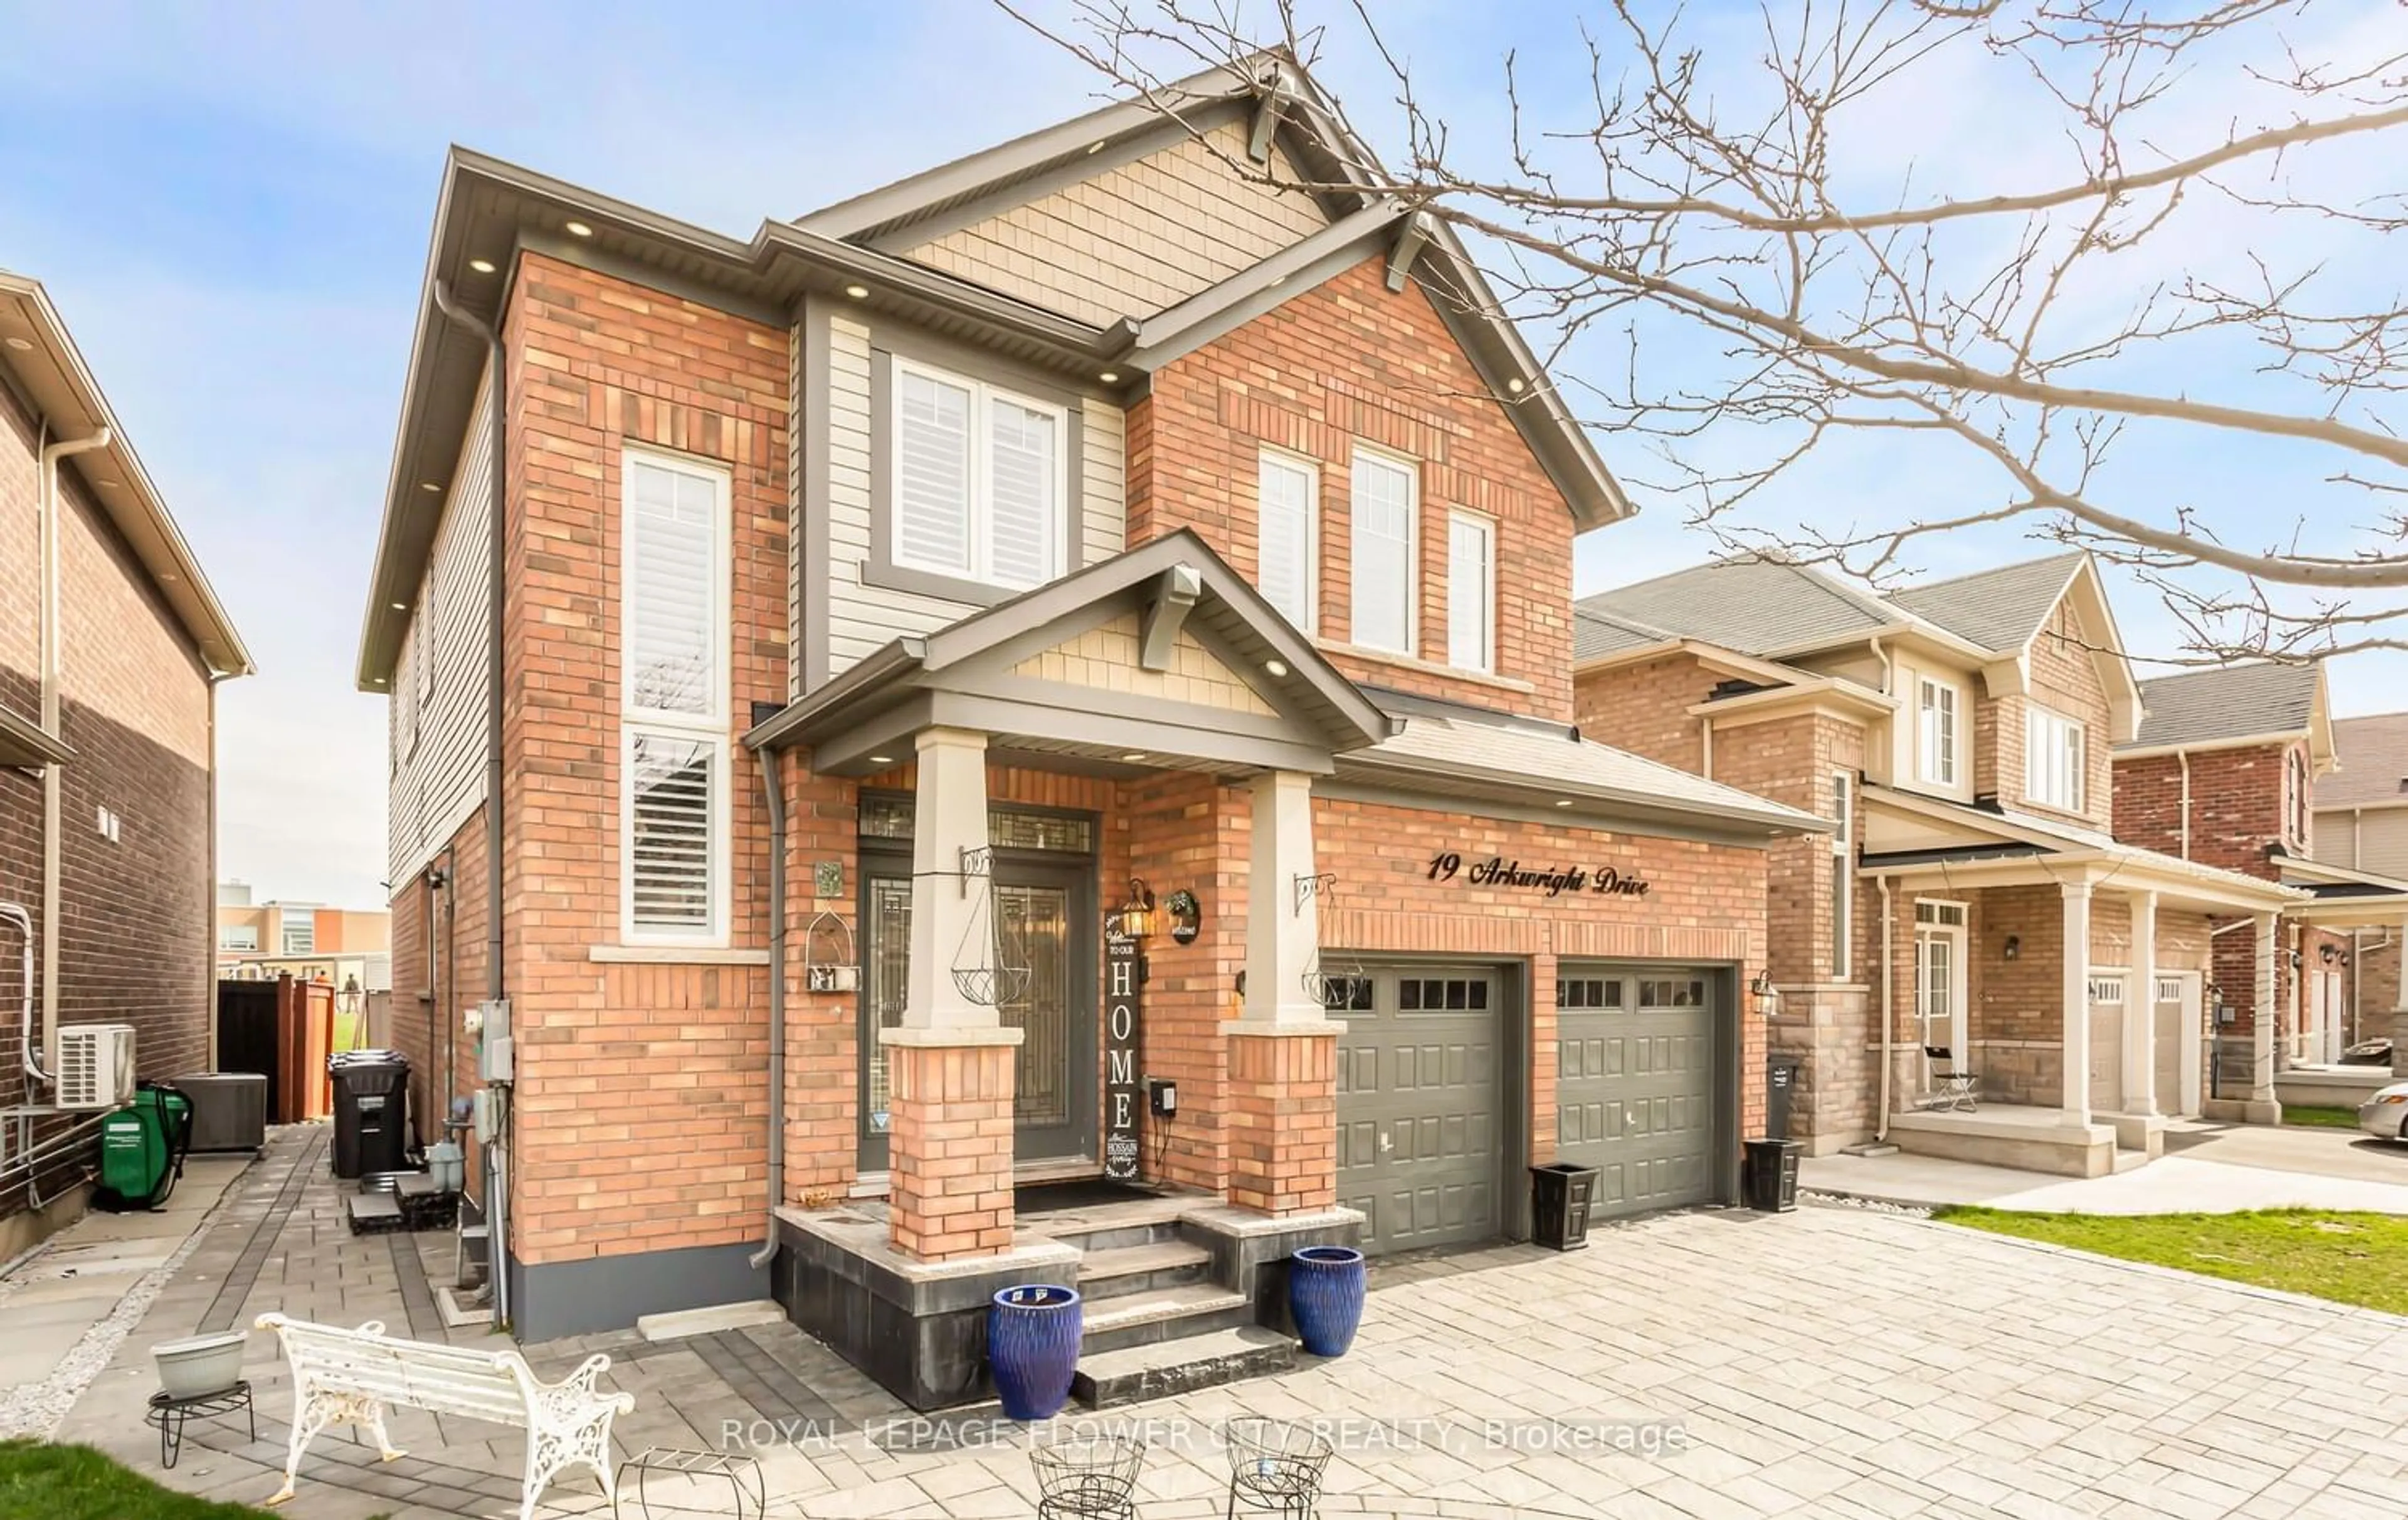 Home with brick exterior material for 19 Arkwright Dr, Brampton Ontario L7A 0V2